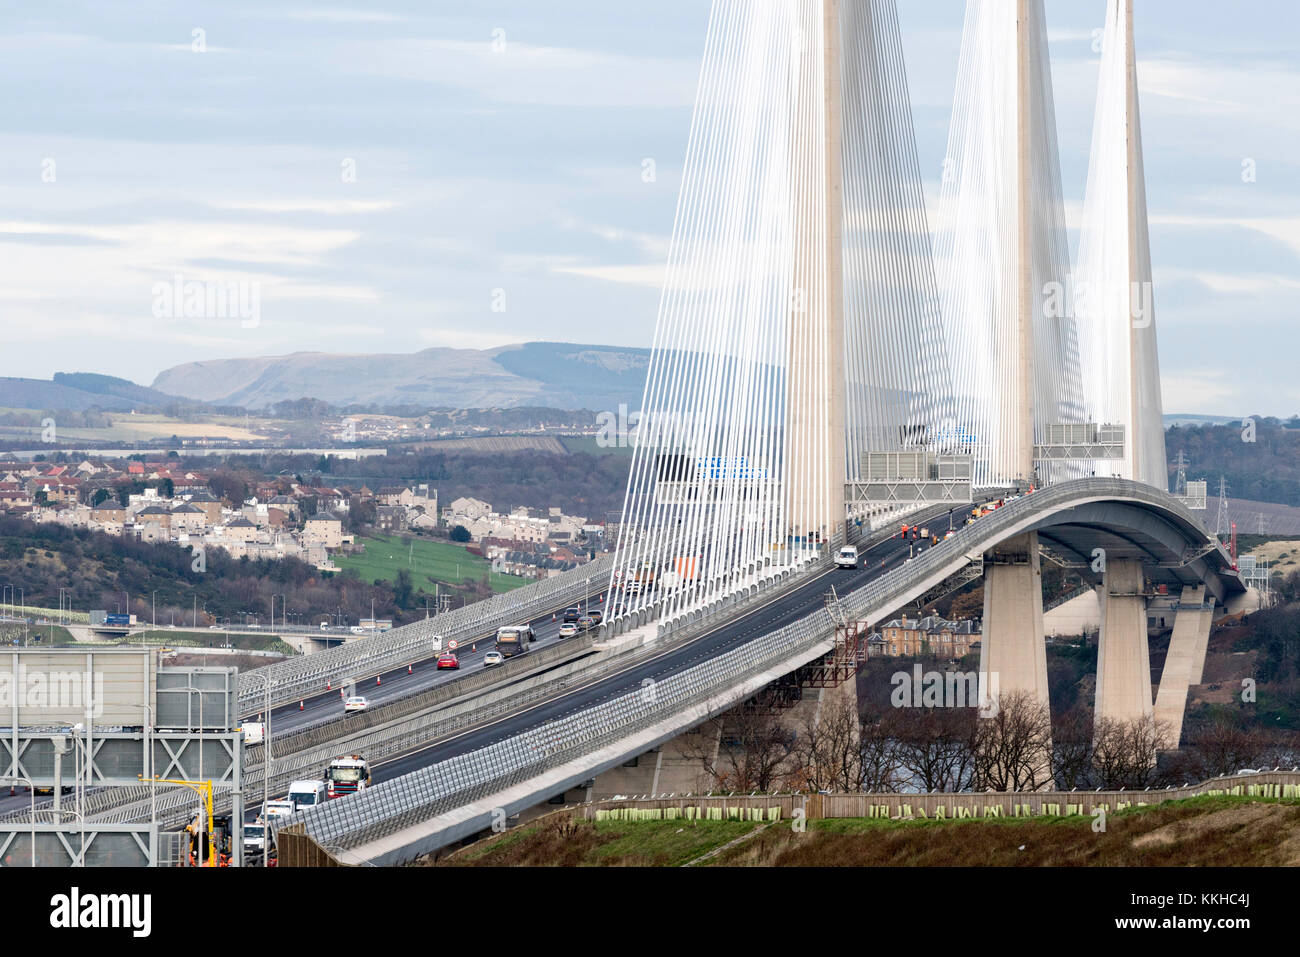 South Queensferry, United Kingdom. 1st Dec, 2017. Southbound carriageway of new Queensferry Bridge is closed to allow emergency repairs to the carriageway. Southbound traffic from Fife is being diverted over the adjacent Forth Road Bridge which has been opened temporarily to traffic. Remedial snagging work to the Queensferry Bridge is expected to take 10 months. Credit: Iain Masterton/Alamy Live News Stock Photo